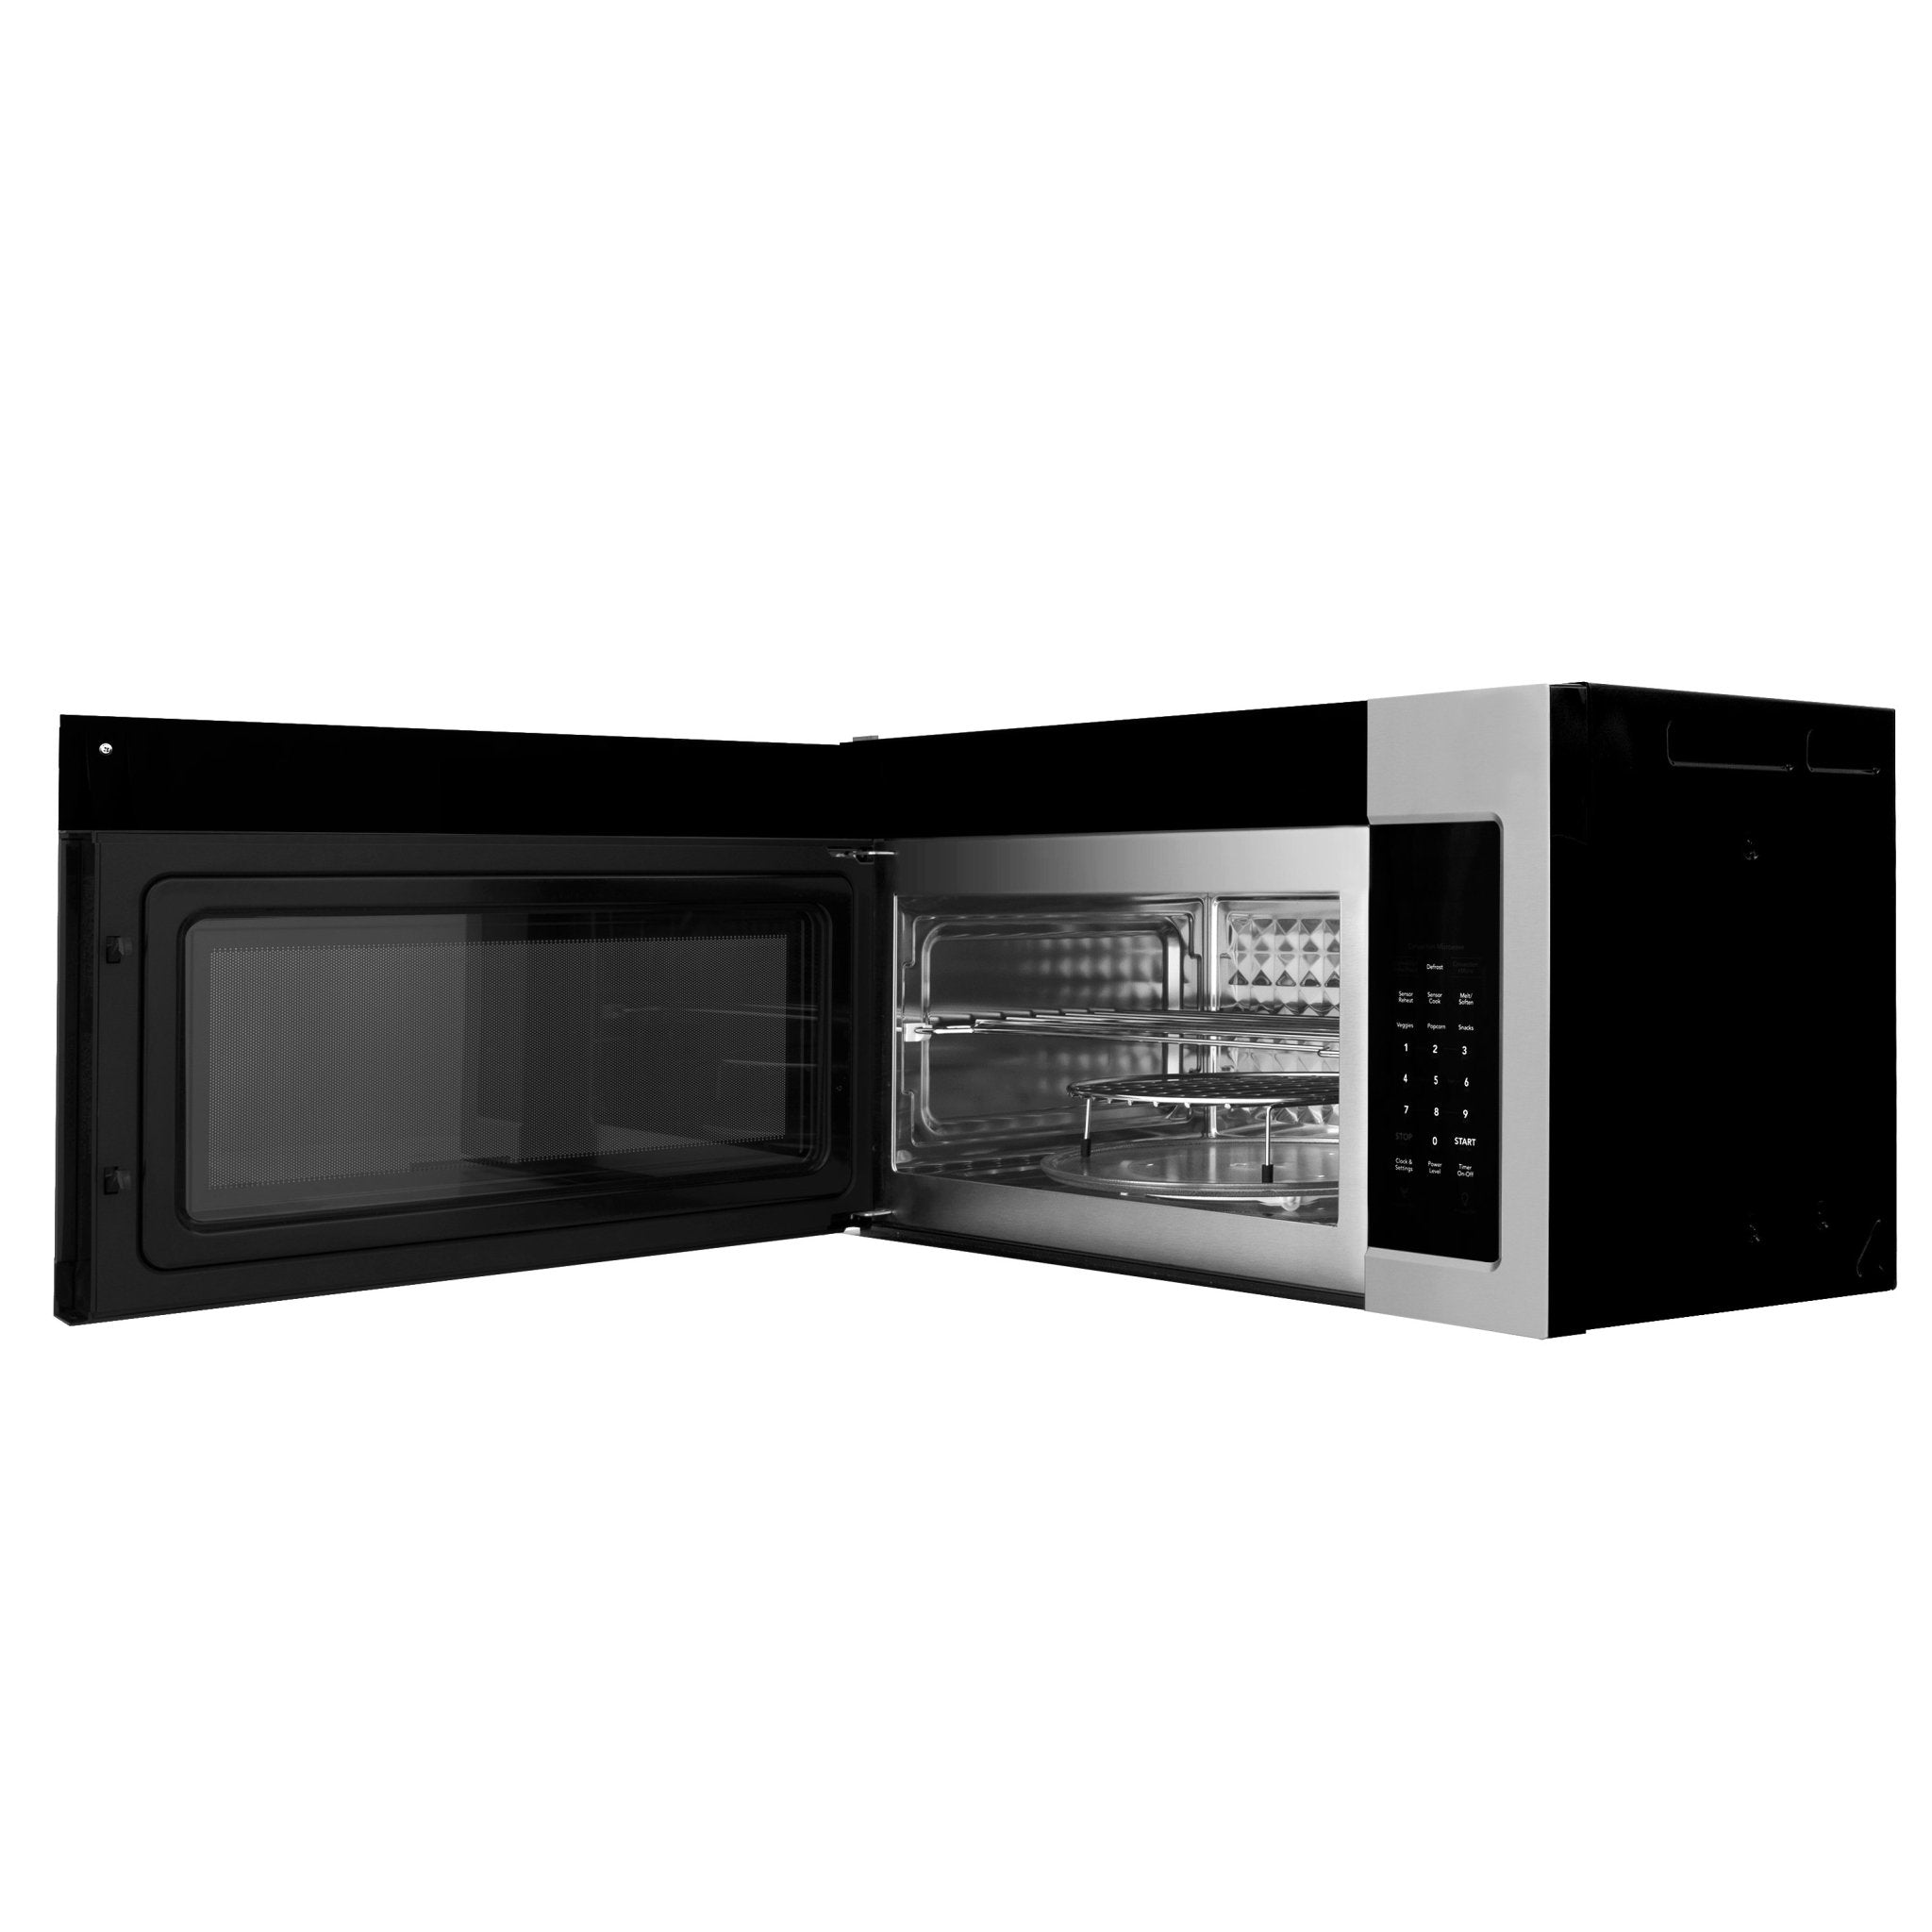 ZLINE Over the Range Microwave Oven in Stainless Steel & Black Stainless Steel with Modern Handle (MWO-OTR-H-30) - Rustic Kitchen & Bath - Microwave - ZLINE Kitchen and Bath